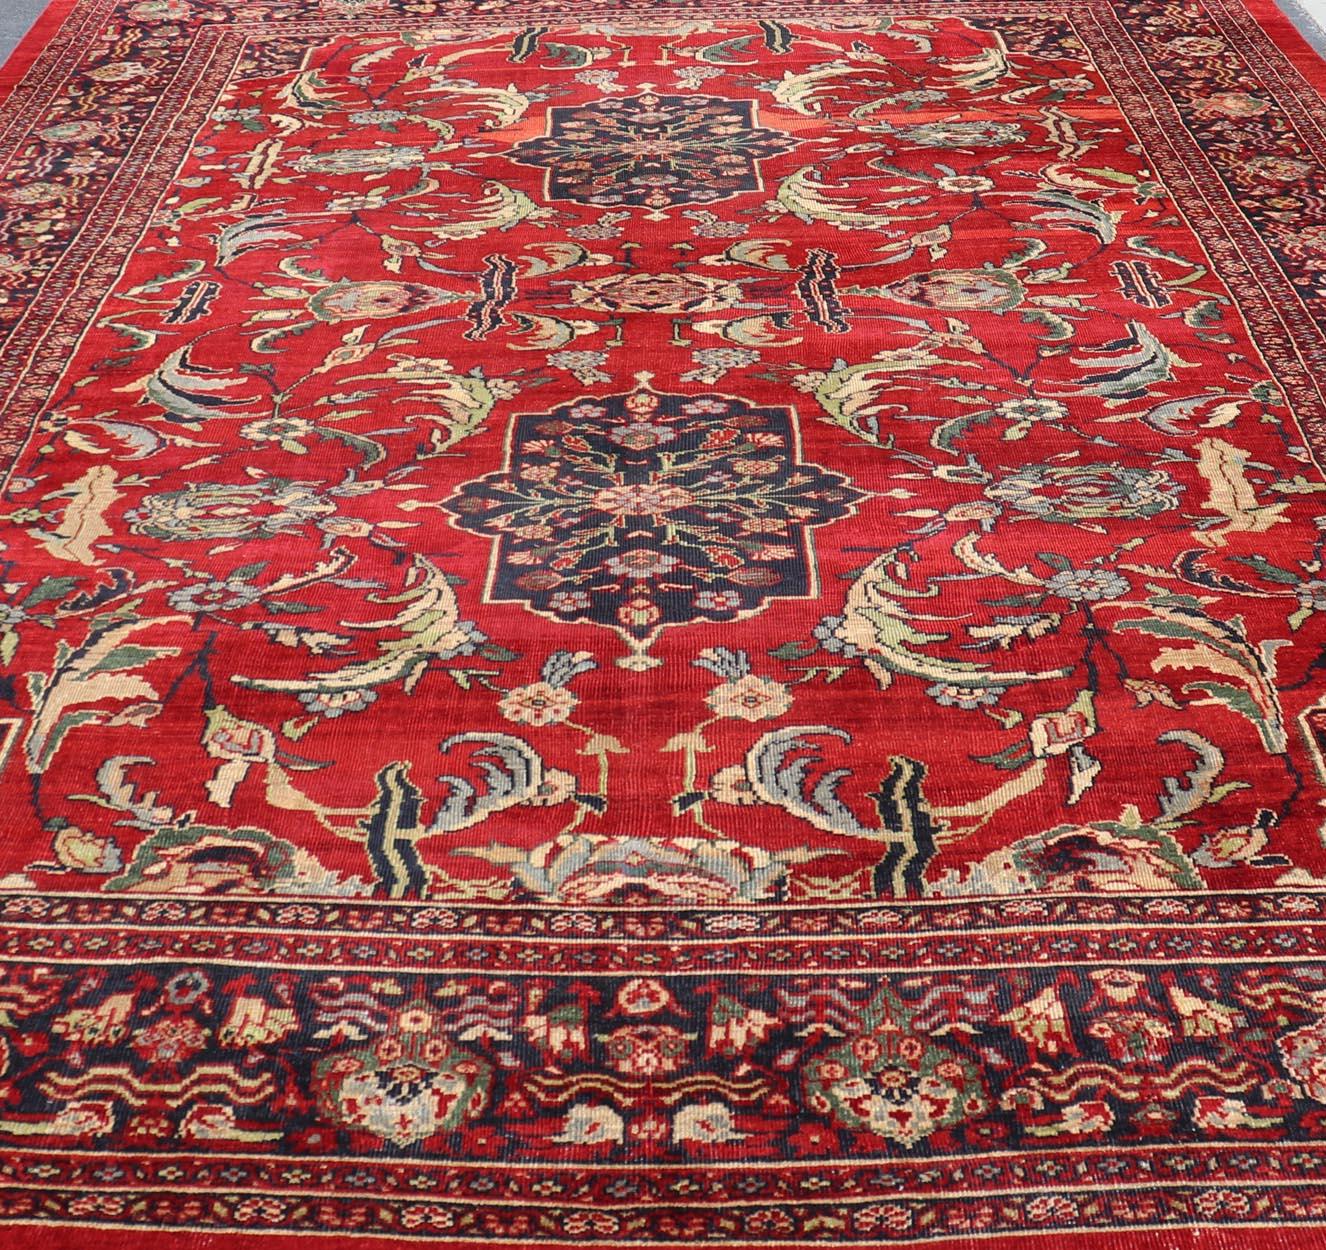 20th Century Antique Persian Zeigler Sultanabad Rug with Botanical Elements Set on Red Field For Sale